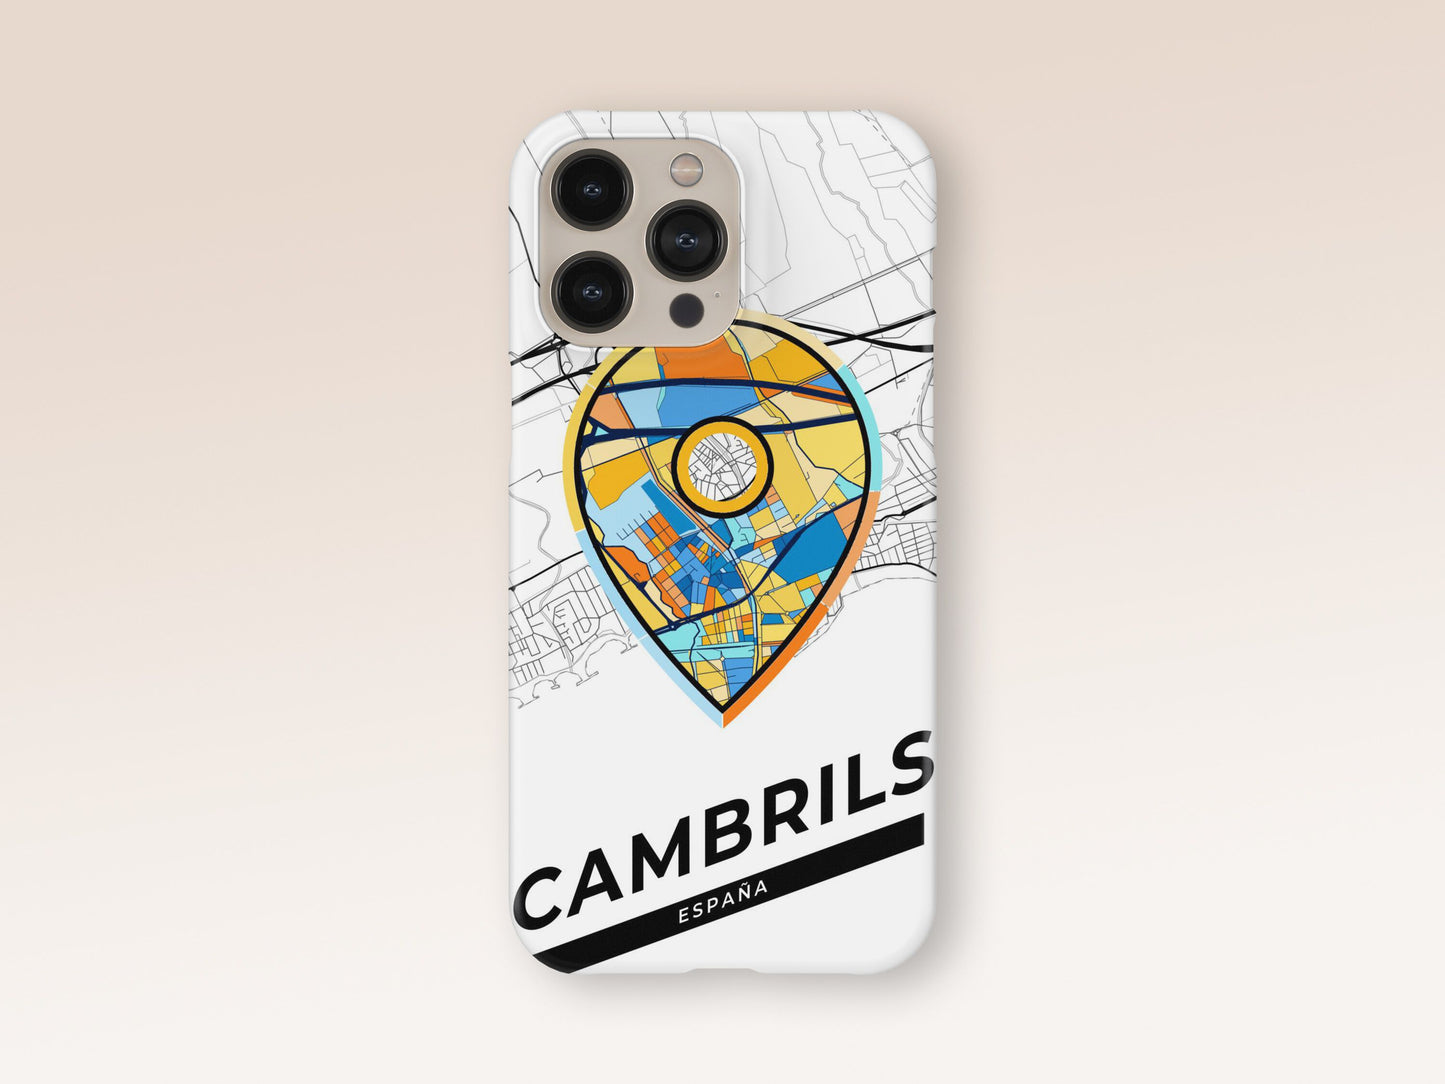 Cambrils Spain slim phone case with colorful icon. Birthday, wedding or housewarming gift. Couple match cases. 1